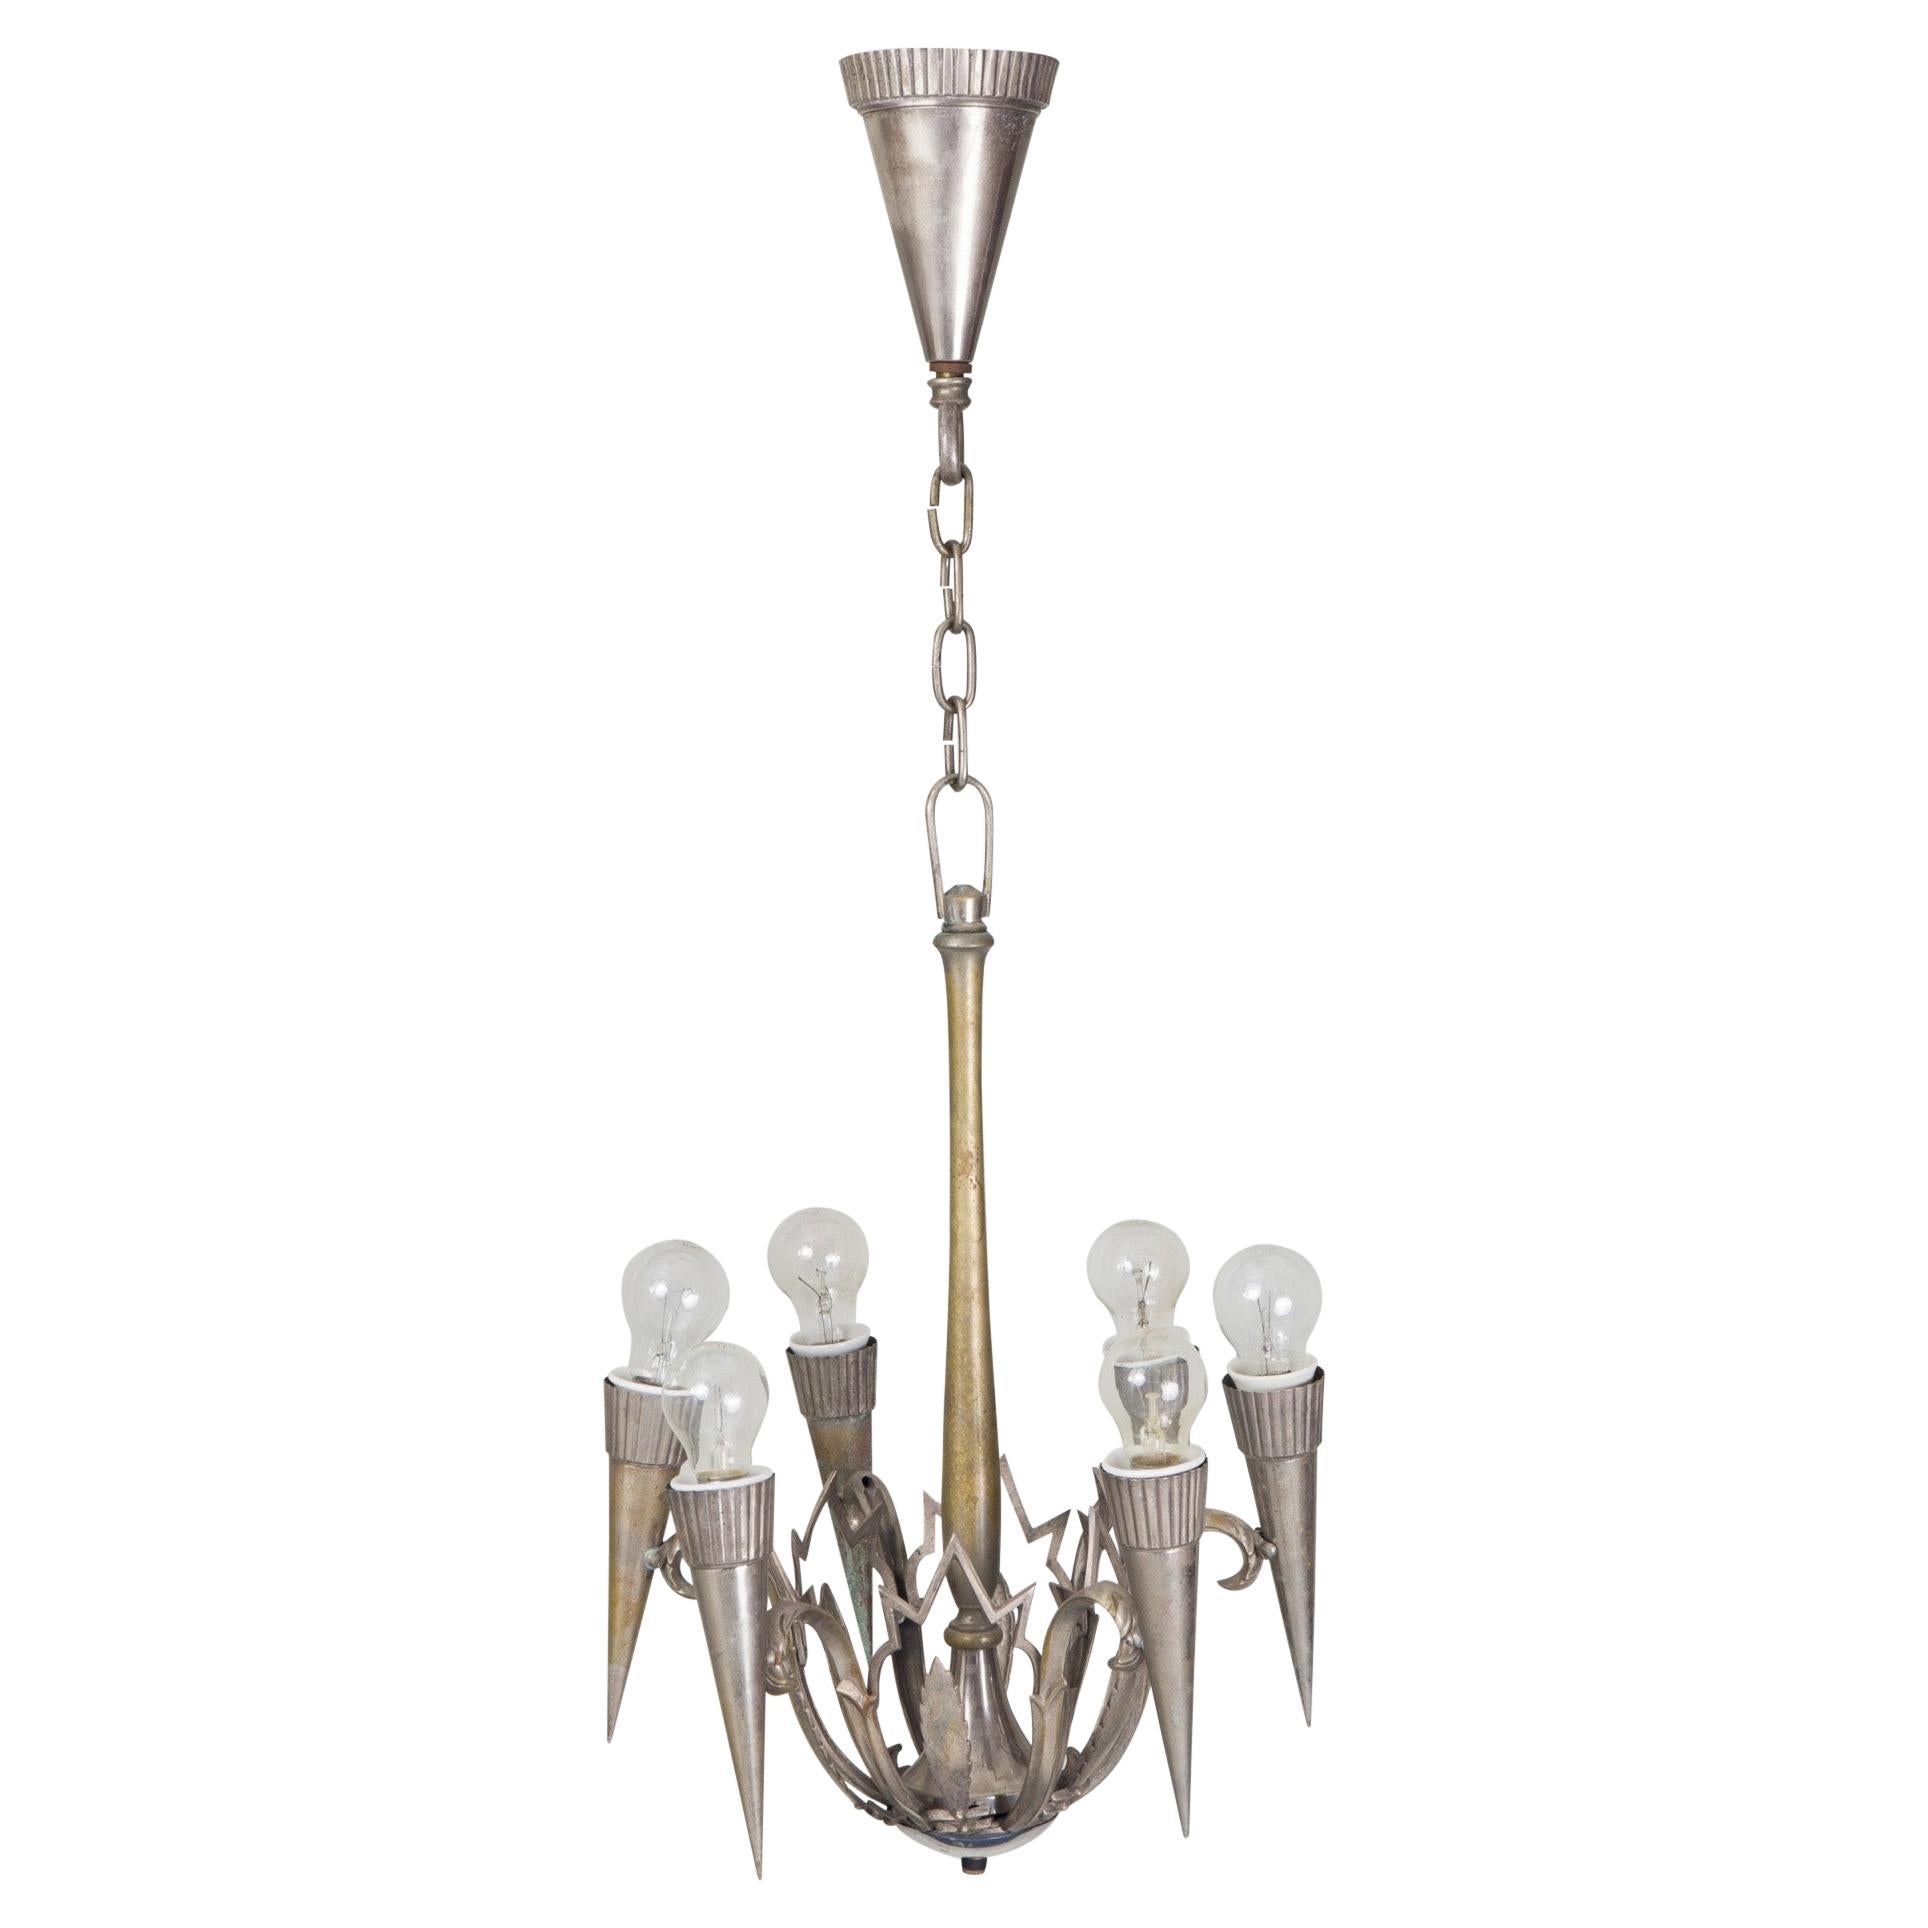 Chandelier by Franta Anyz, Perfect Condition, Made 1920s, in Czechia